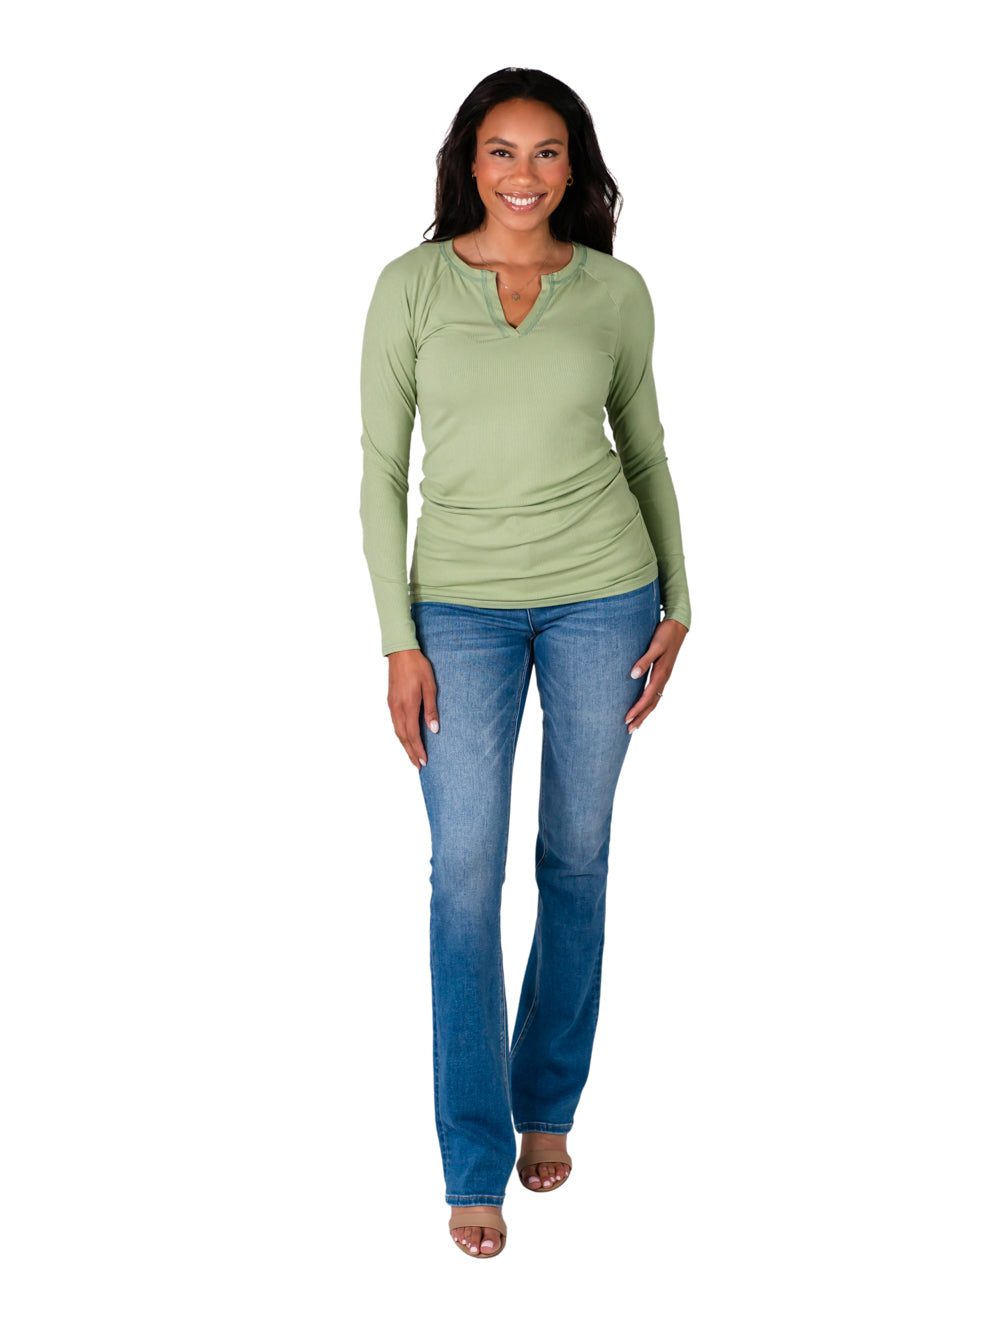 Olive Long Sleeve Top for Tall Women